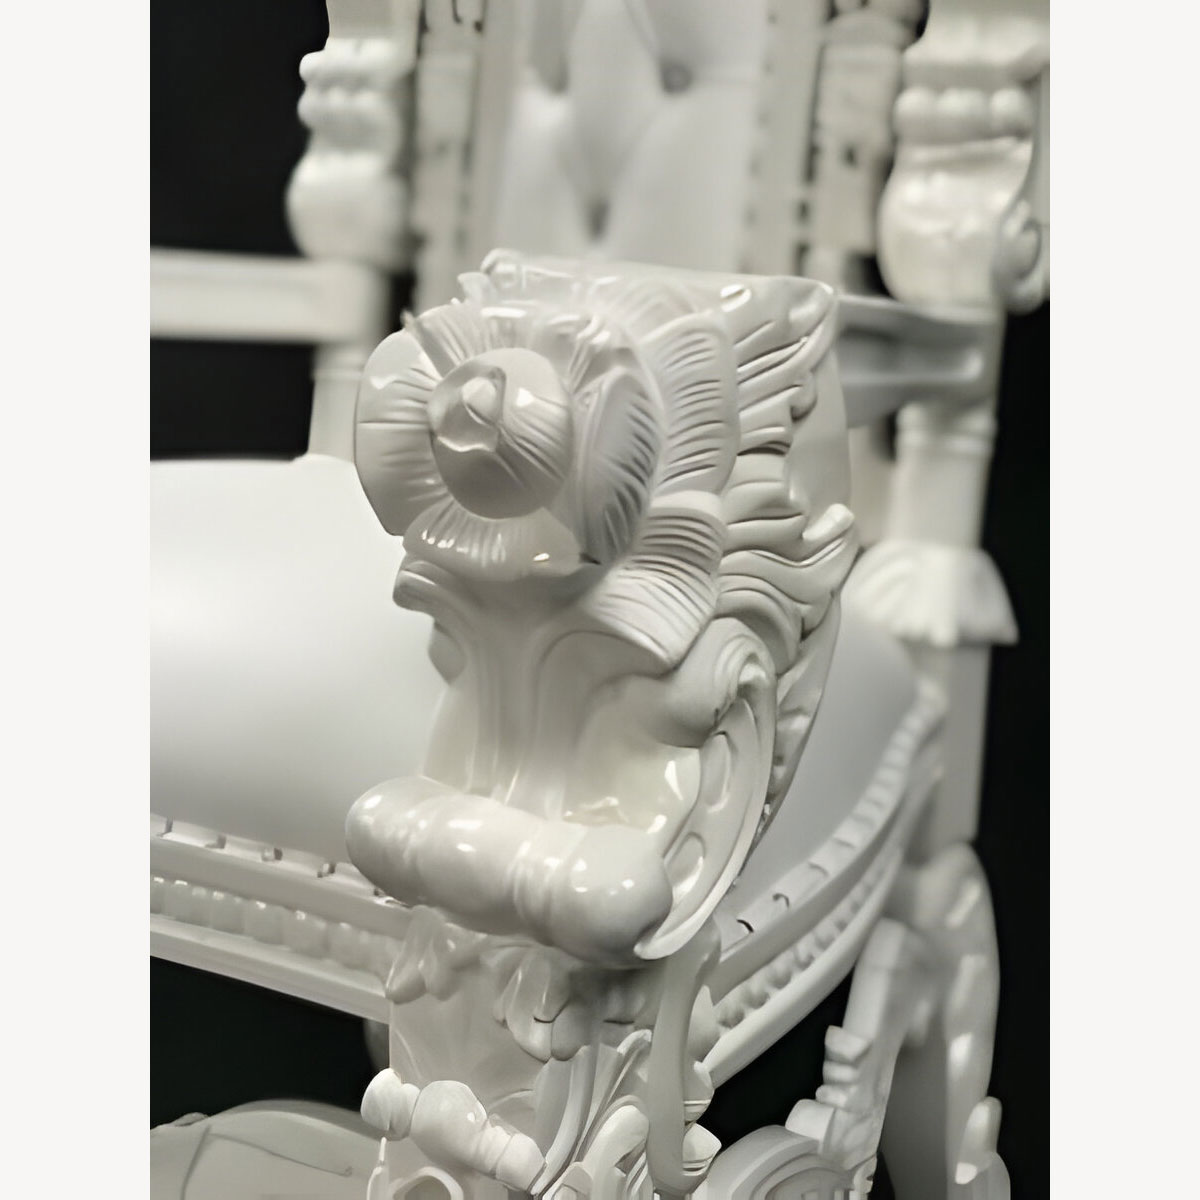 Beautiful Large Flower Rose Carved Throne Chair In Gloss Lacquered White With White Faux Leather And Crystal Buttons 9 - Hampshire Barn Interiors - Beautiful Large Flower Rose Carved Throne Chair In Gloss Lacquered White With White Faux Leather And Crystal Buttons -